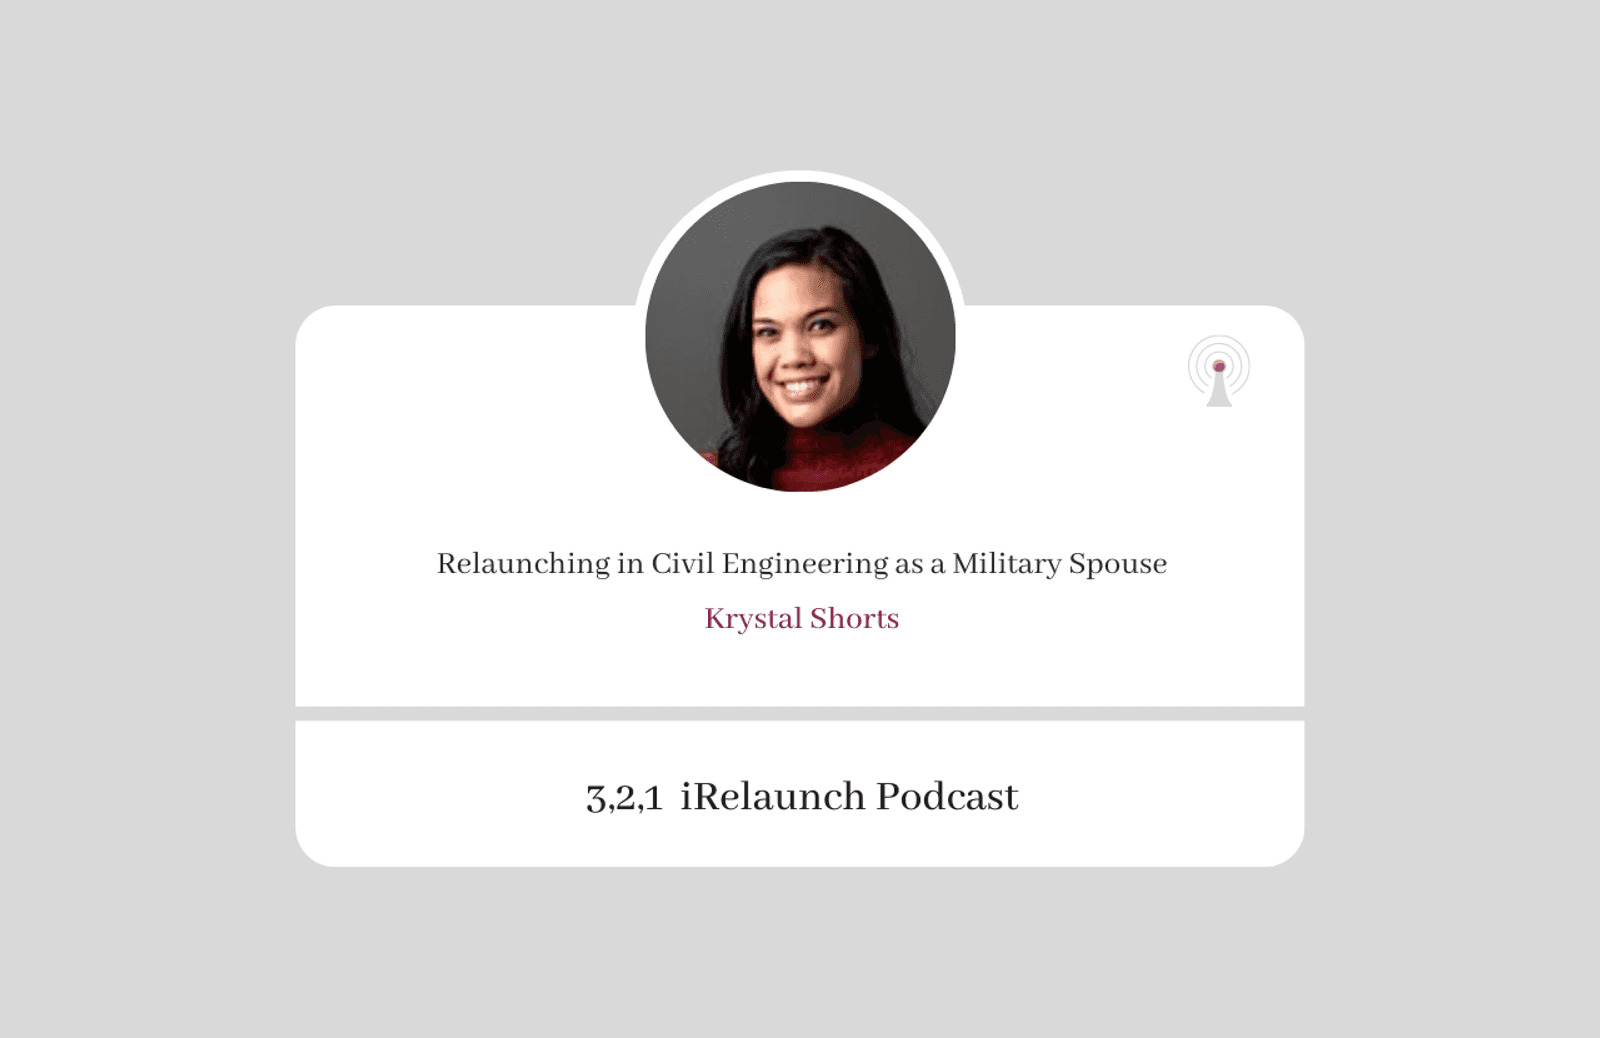 3, 2, 1 iRelaunch Podcast Thumbnail for Episode #187 with Krystal Shorts's headshot. The episode's title is: "Relaunching in
Civil Engineering as a Military Spouse."